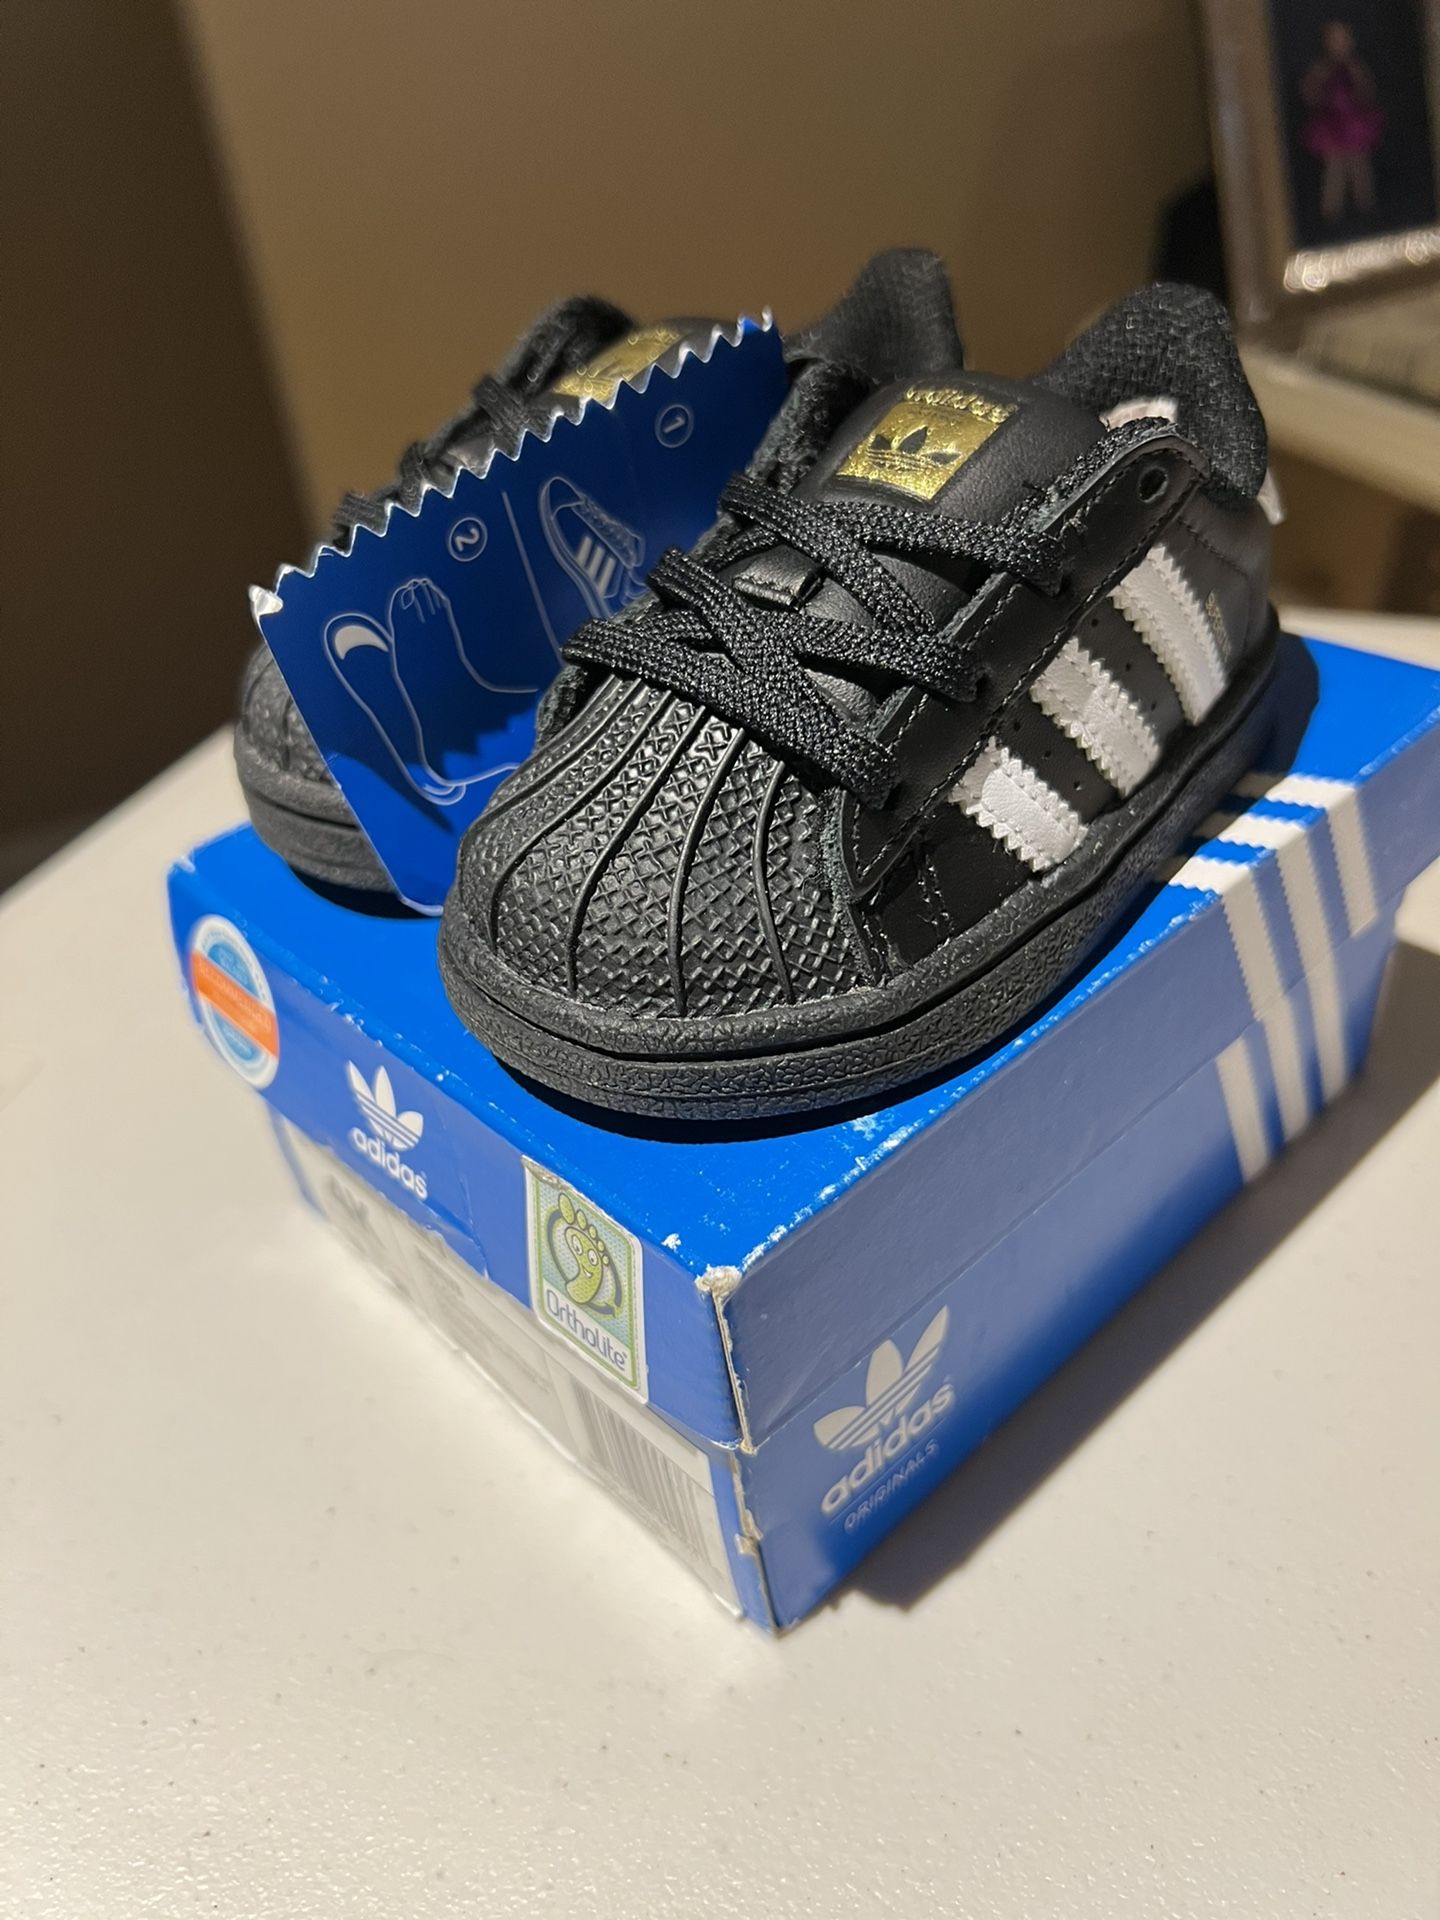 Adidas Originals Infant & Toddler's SUPERSTAR I Shoes Core Black/White BB9078 4K. *Brand New In Box   Size 4K